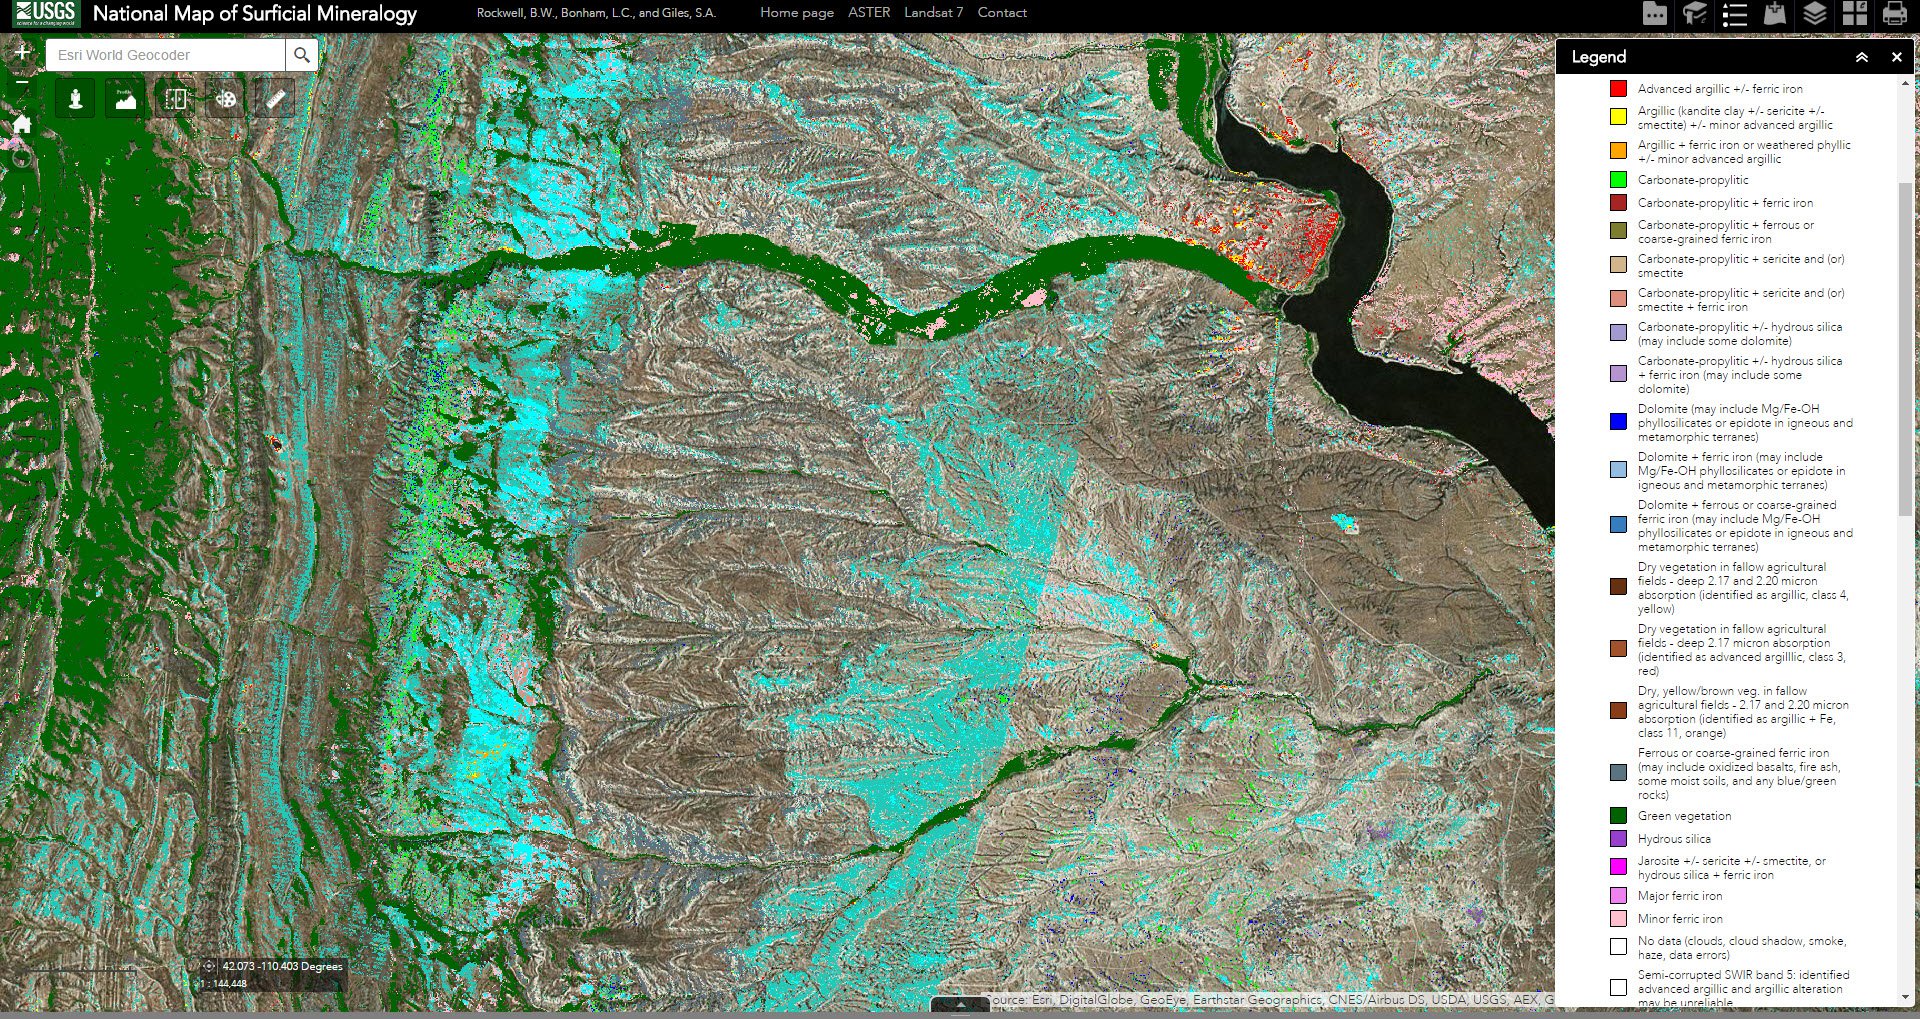 Screen shot of ASTER data over Lincoln County, Wyoming, United States from the National Map of Surficial Mineralogy.